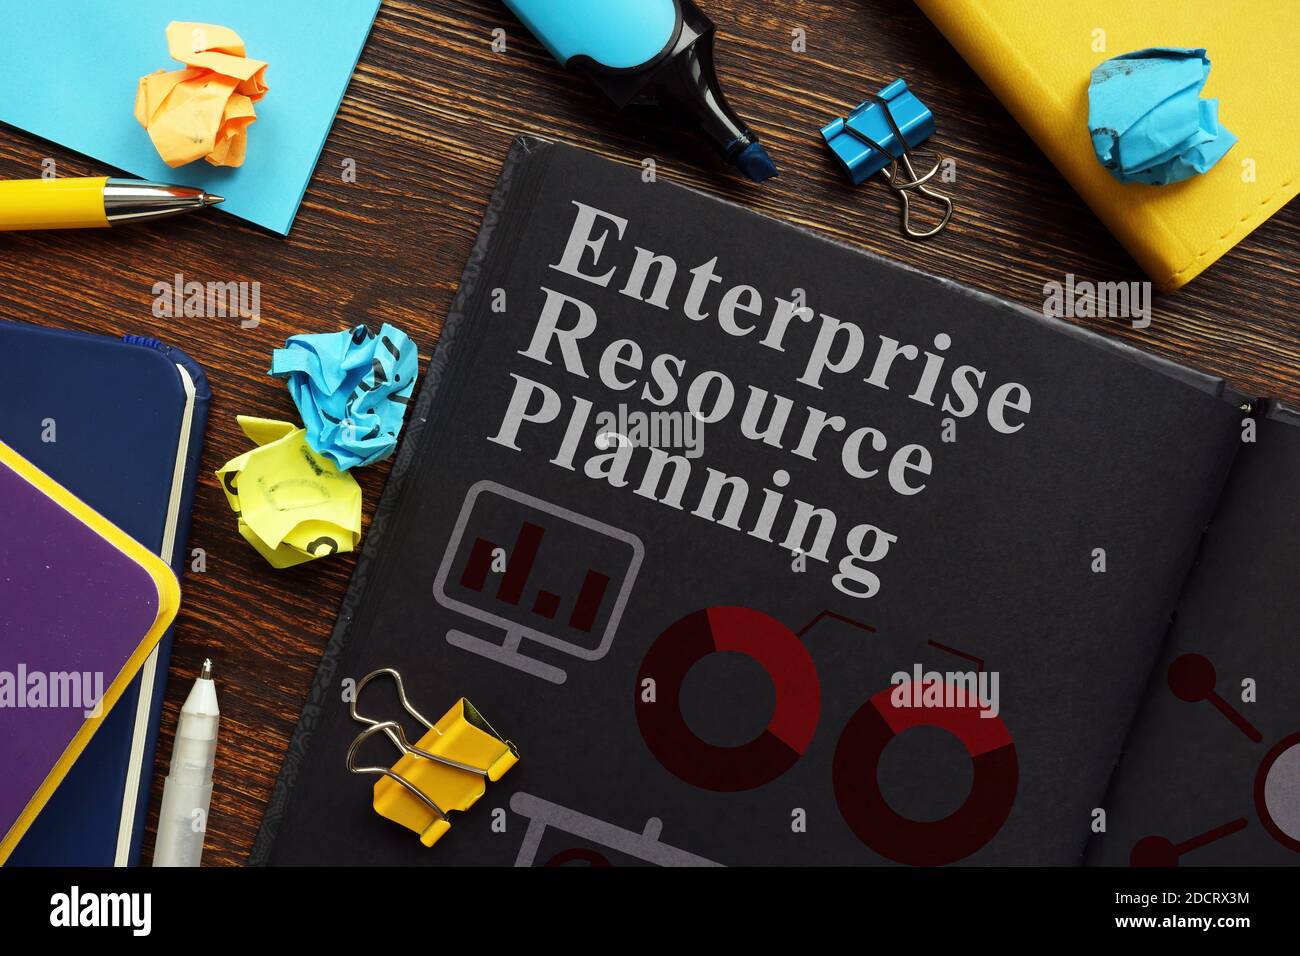 Enterprise Resource Planning ERP documents with charts and marks. Stock Photo